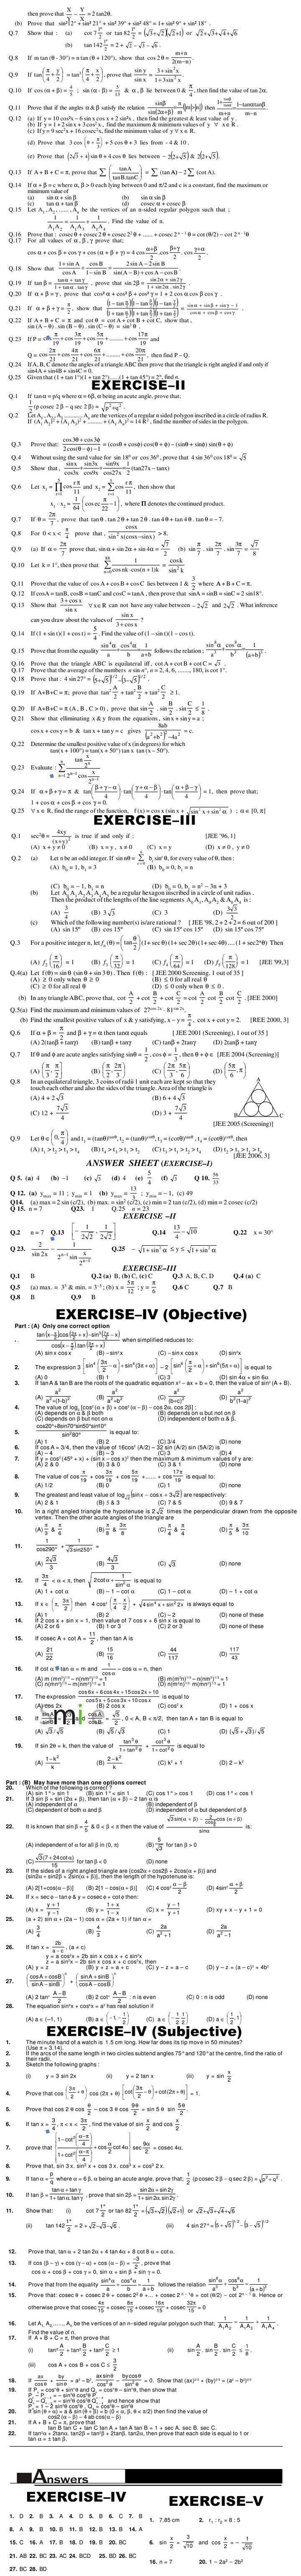 Maths Study Material - Chapter 22